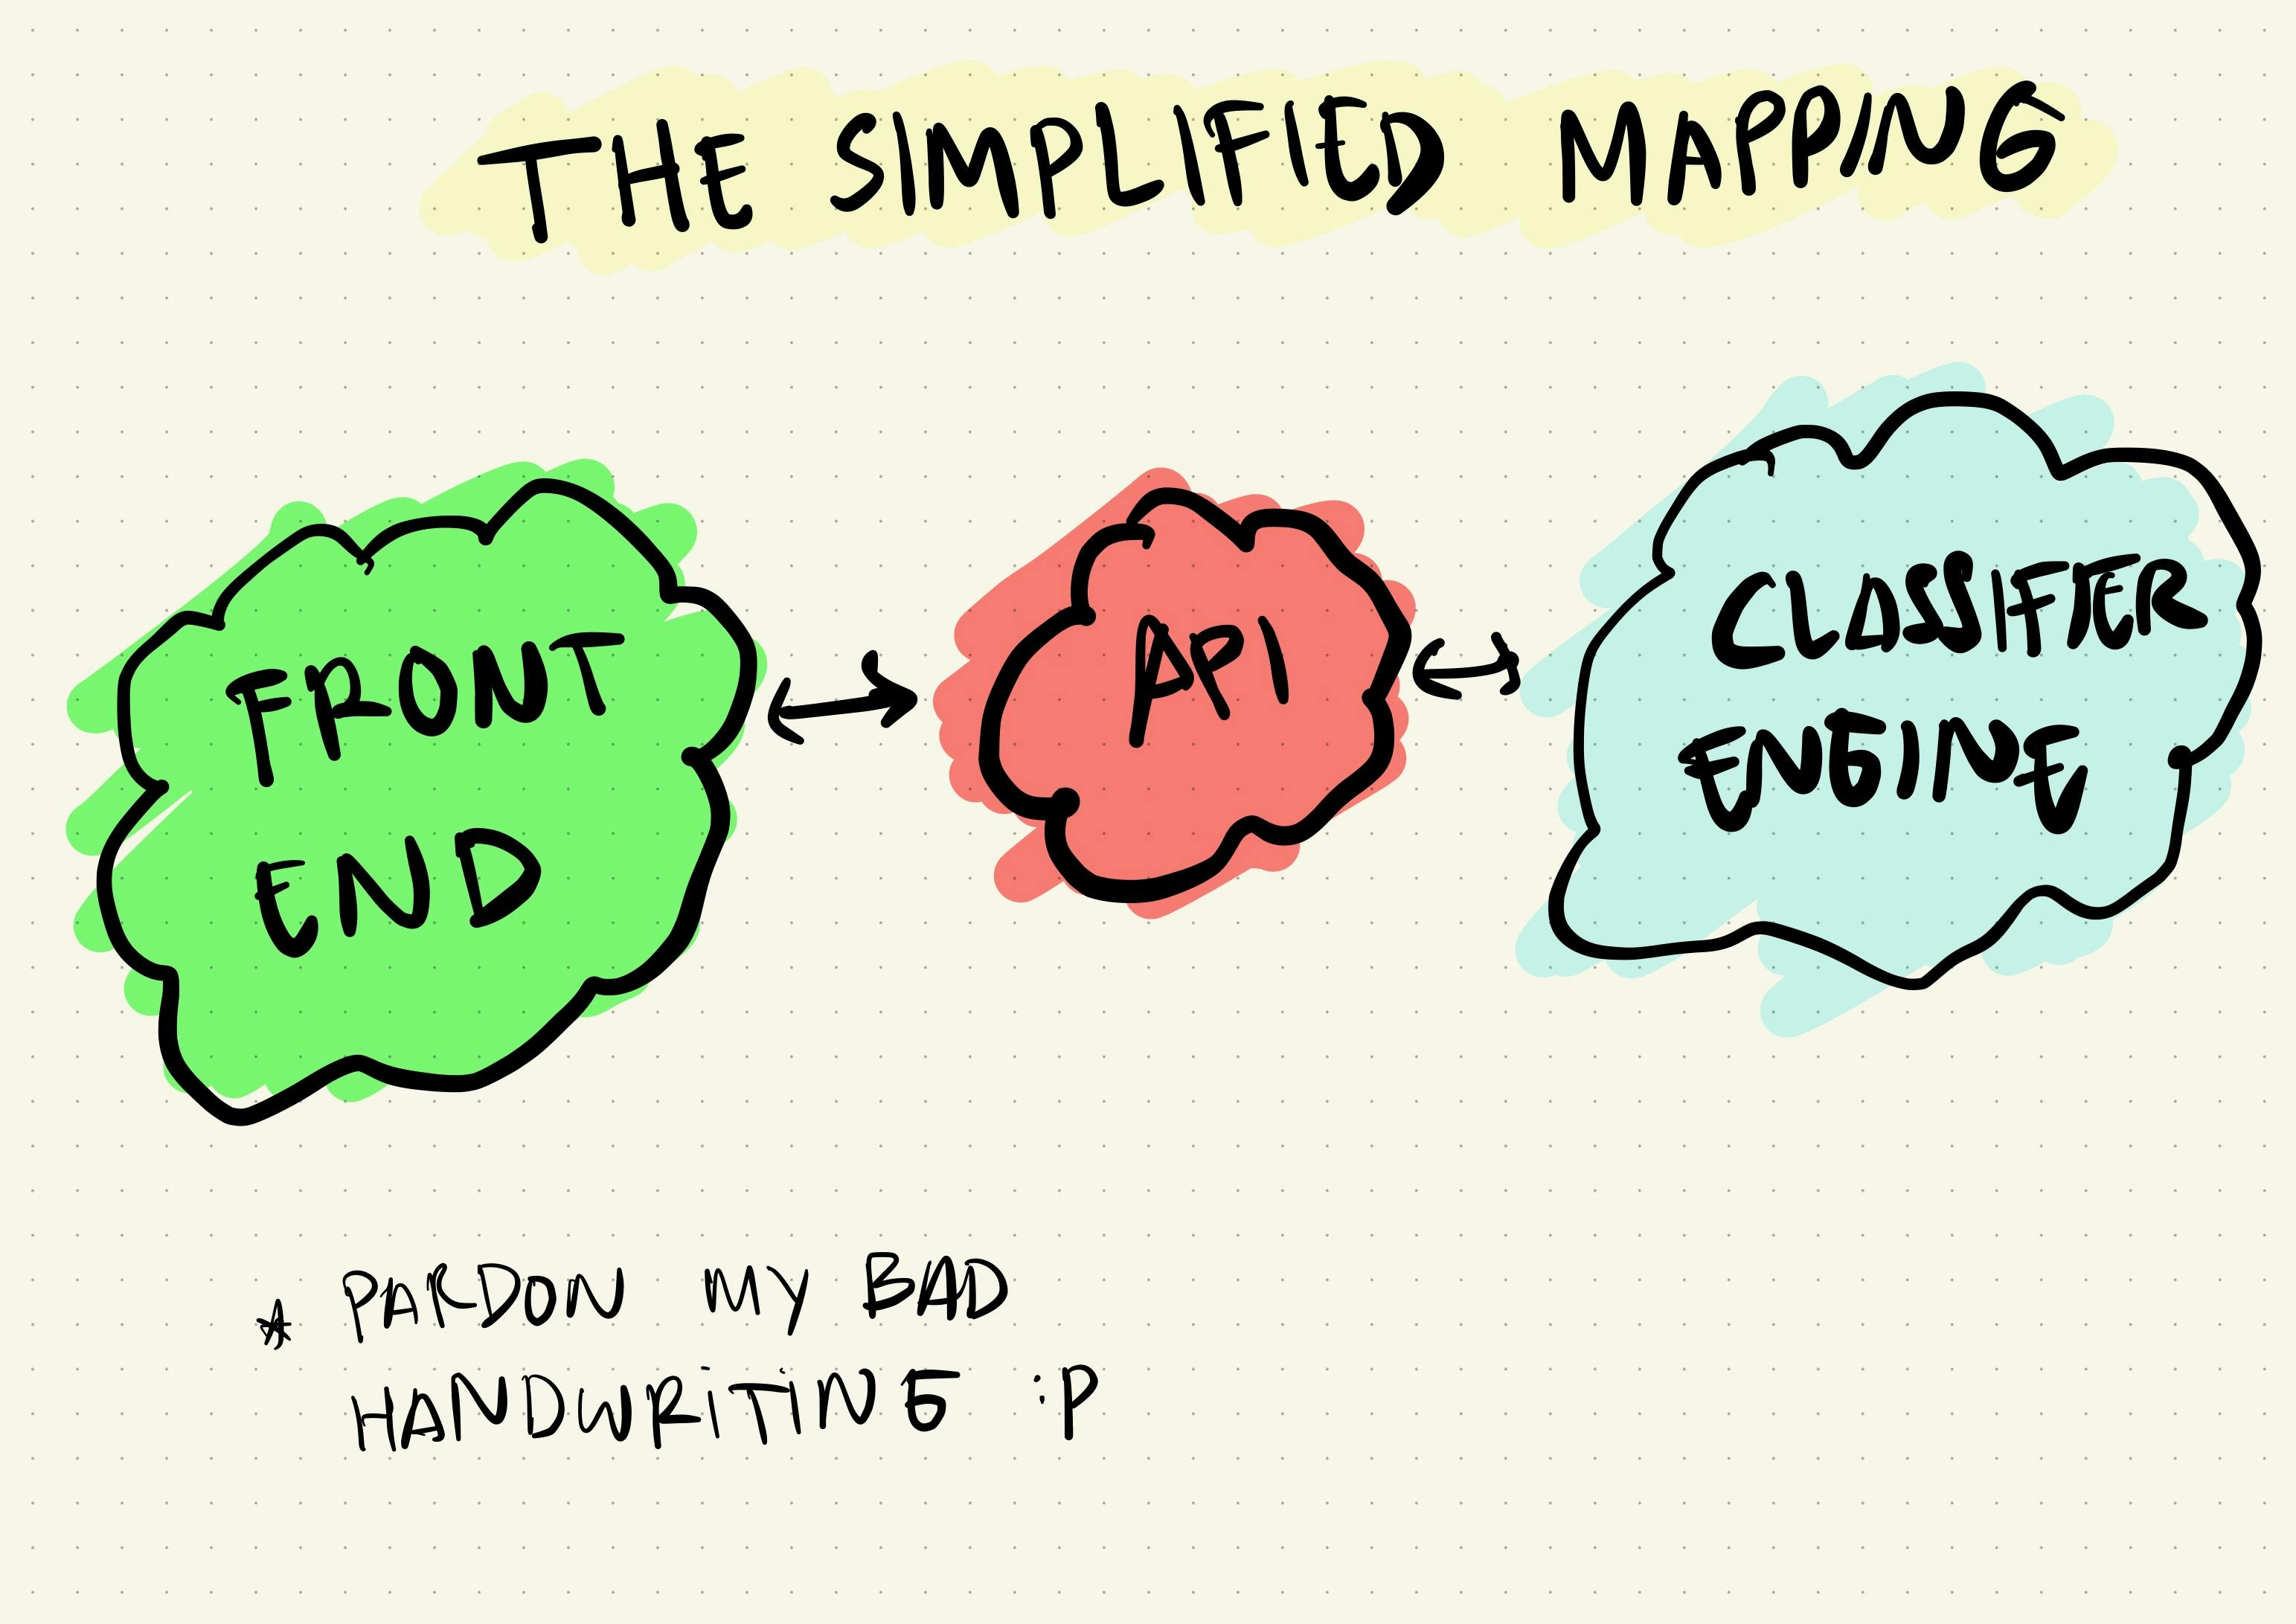 Simplified Mapping